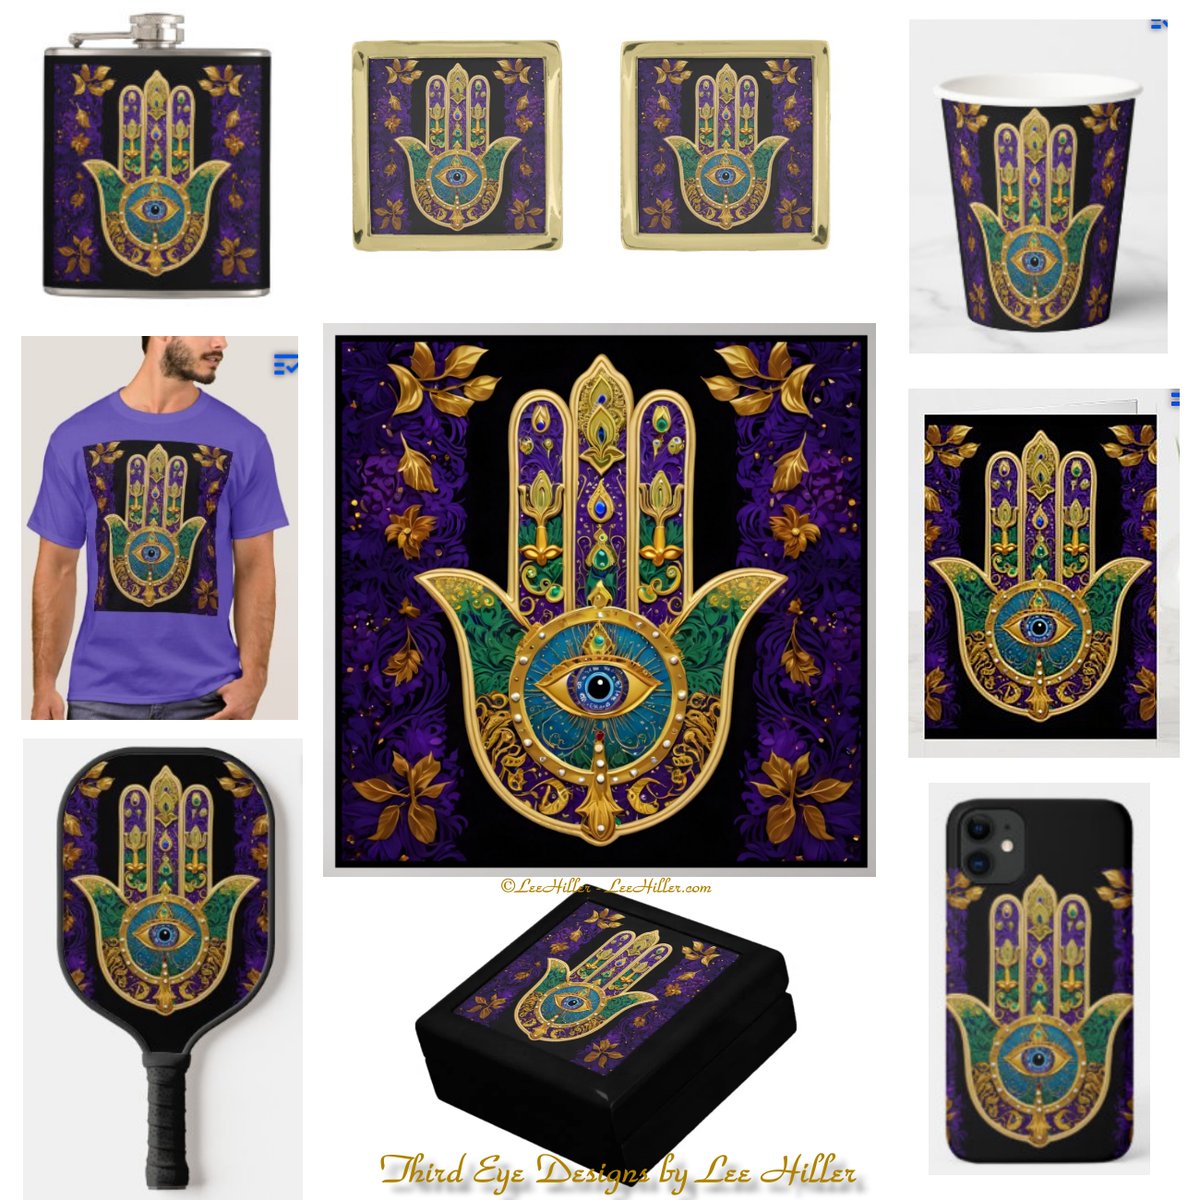 💚💎💜✨🪬✨💜💎💚 
The #Hamsa symbolizes protection, blessings, & the ability to ward off evil. It is believed to bring good fortune, happiness, & prosperity to those who wear or display it. 
#gifts #tshirt #poster #cards #pickleball #homedecorations
bit.ly/MardiGrasHamsa